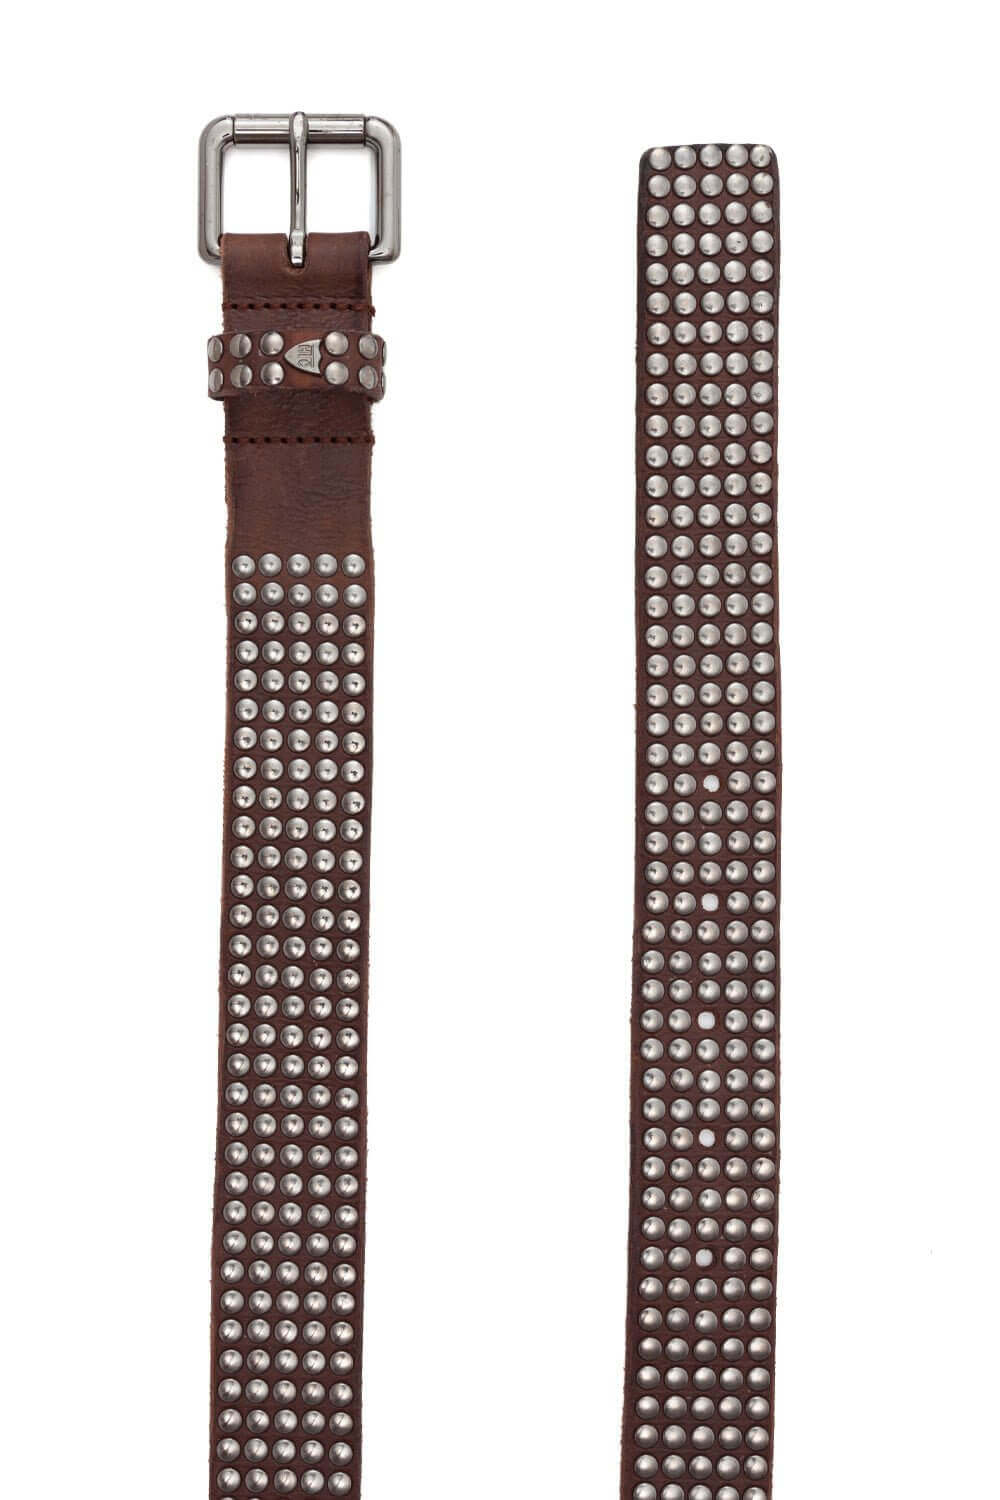 5.000 STUDS BELT Brown leather belt with studs, brass buckle, studded zamac belt loop with HTC logo rivet. Height: 3.5 cm. Made in Italy. HTC LOS ANGELES